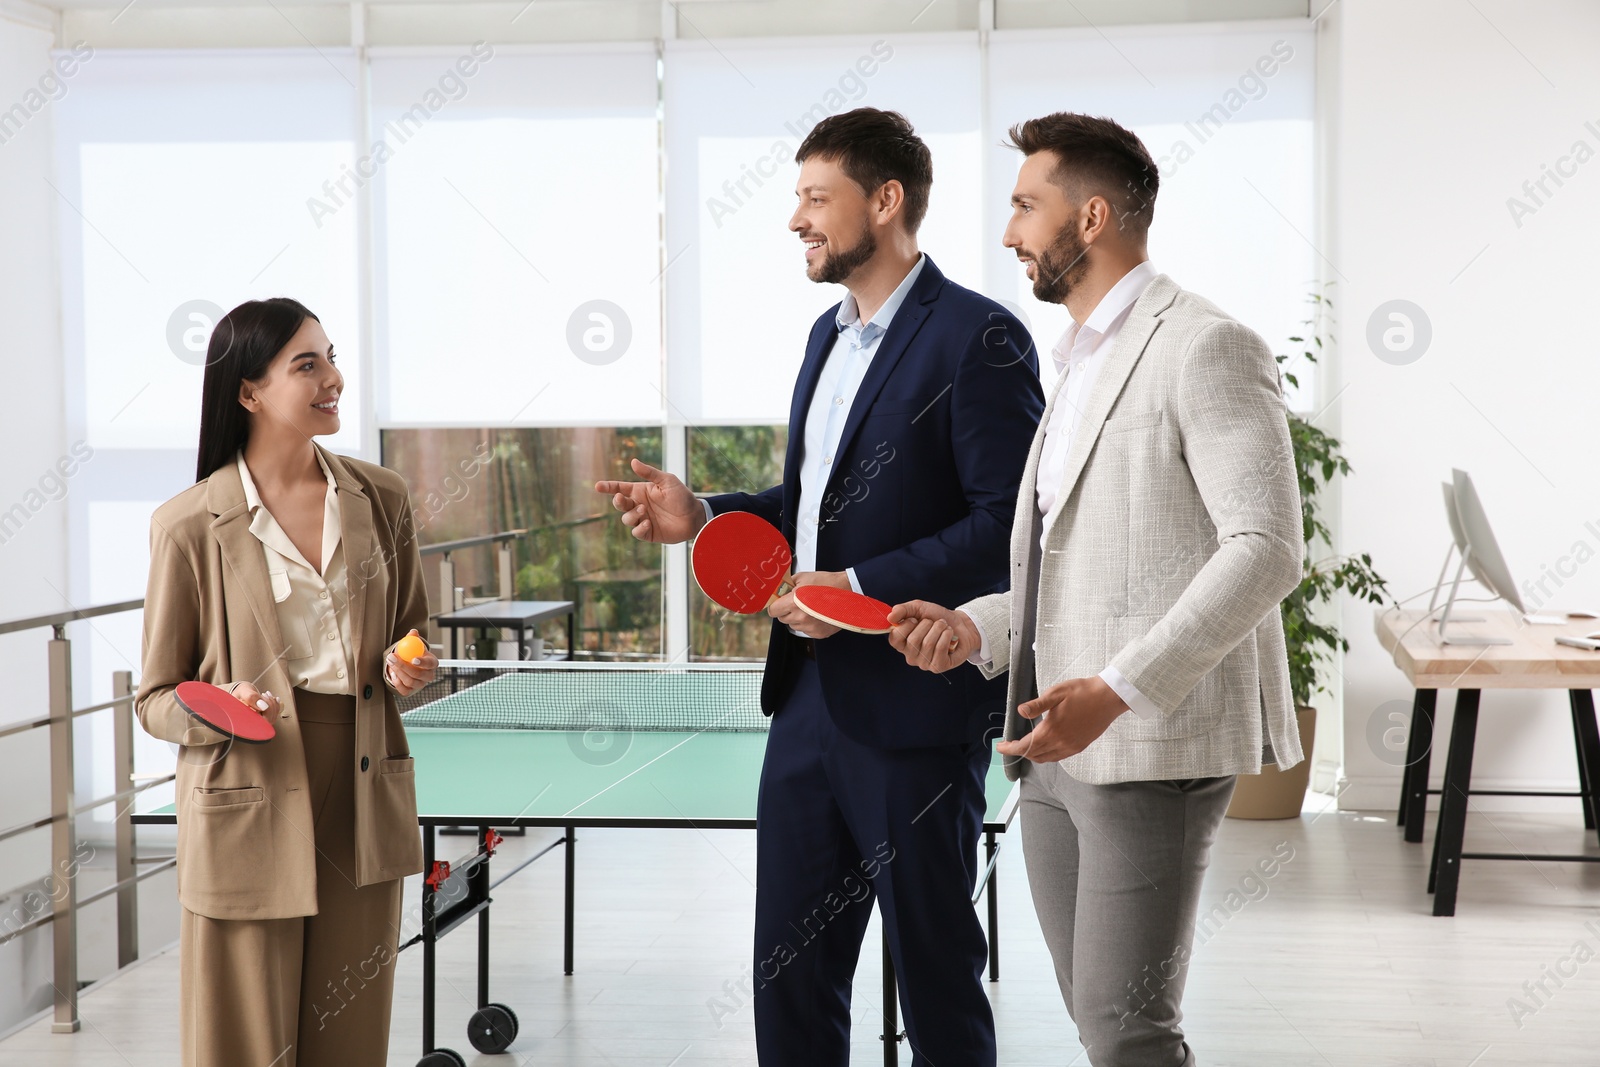 Photo of Business people talking near ping pong table in office